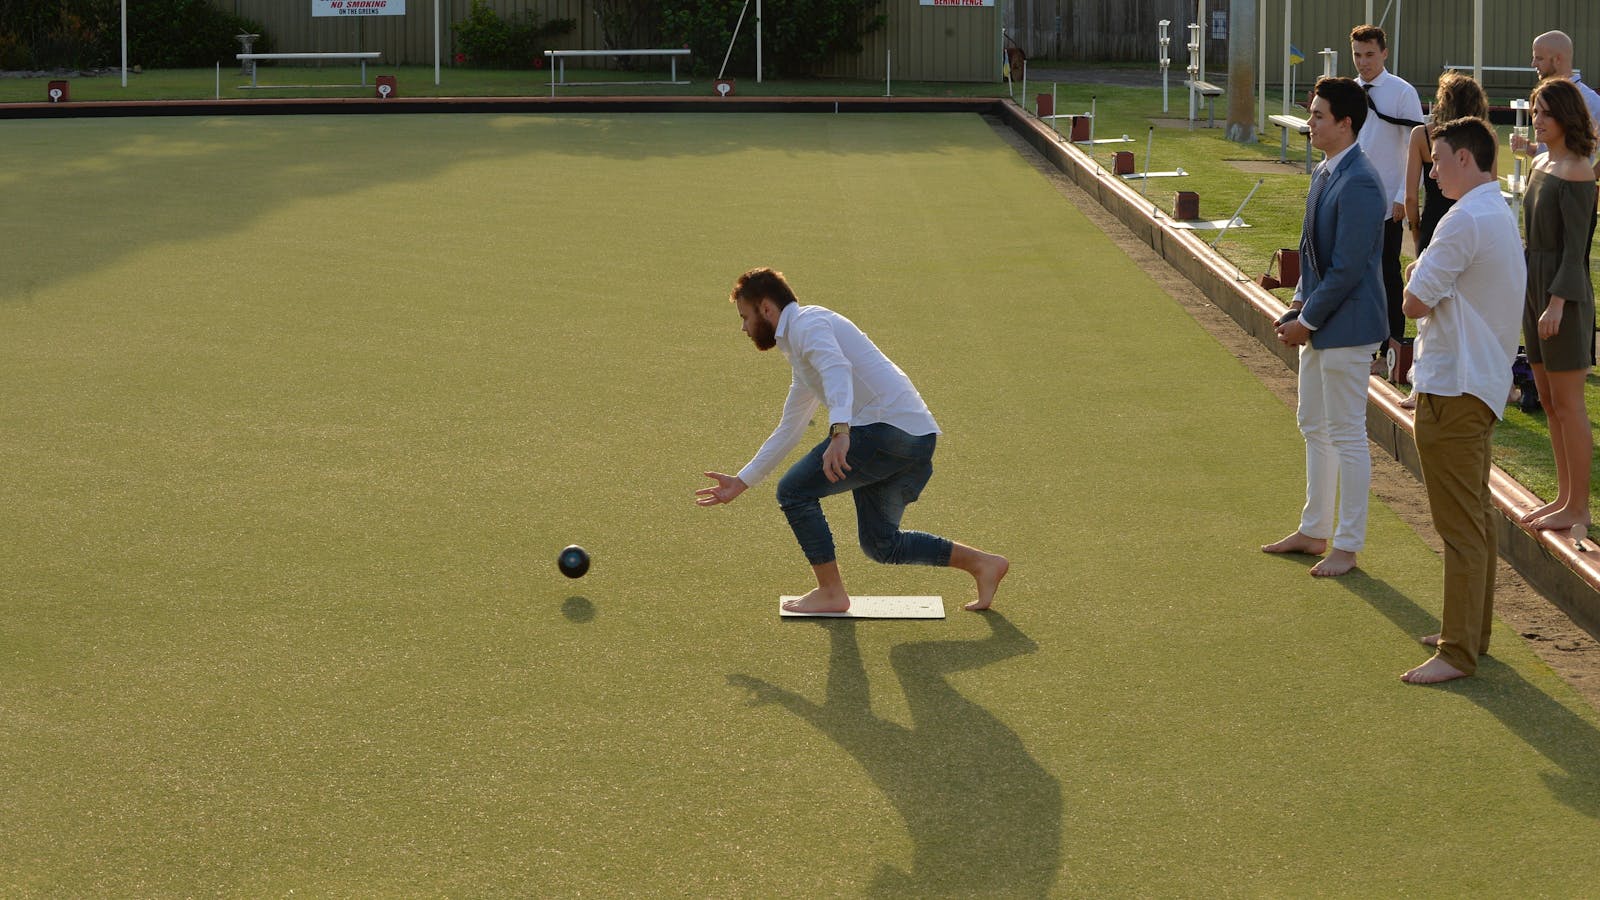 Enjoy a game of bowls on our greens with friends!